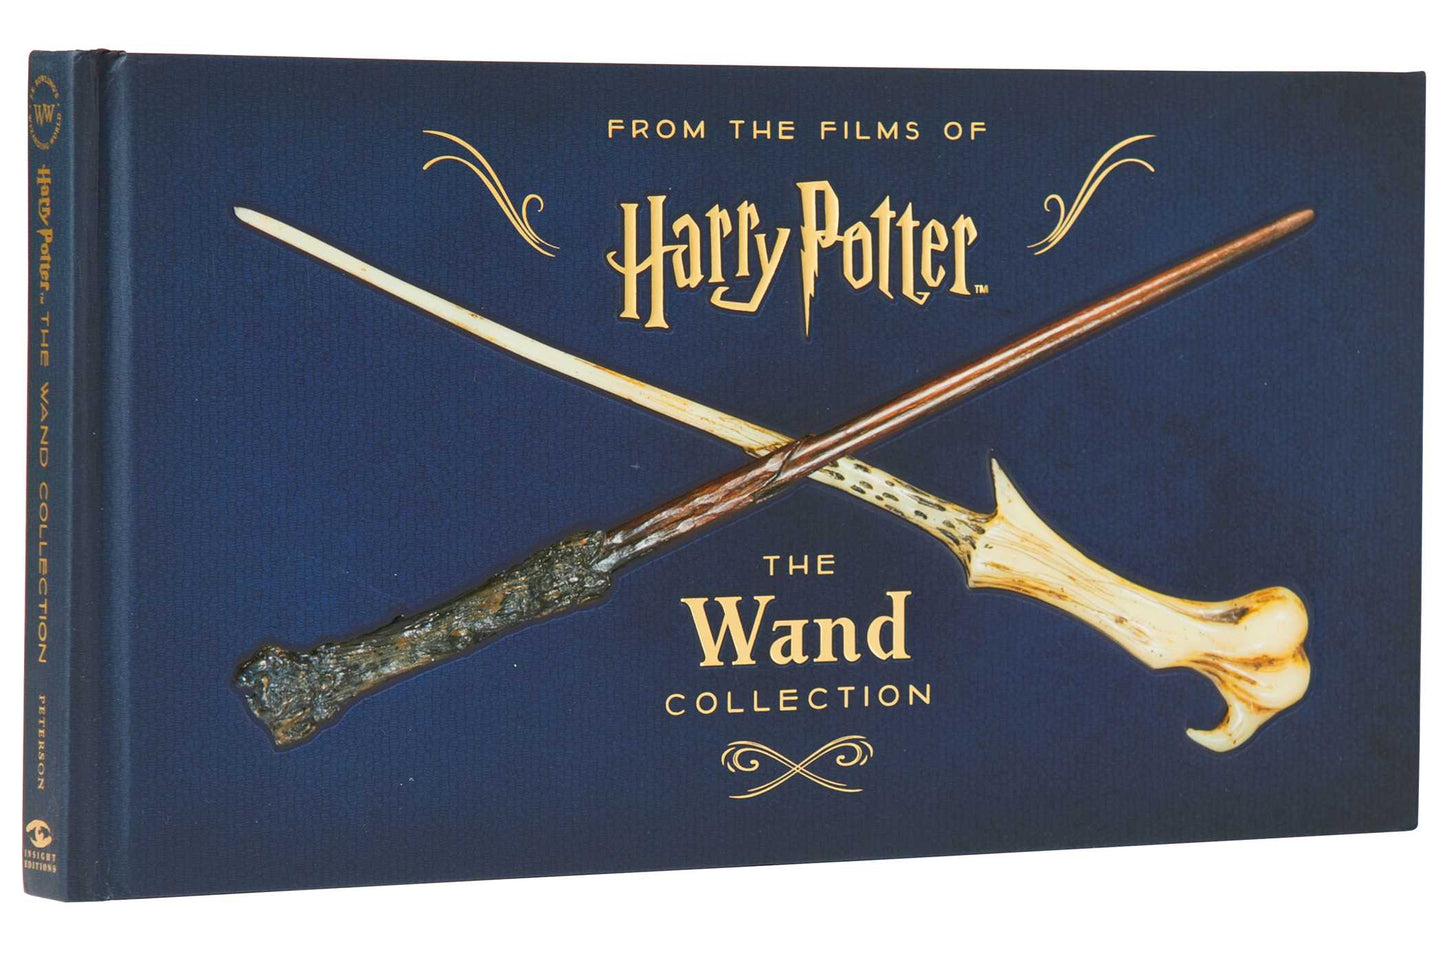 Harry Potter: The Wand Collection (Book), pre venta